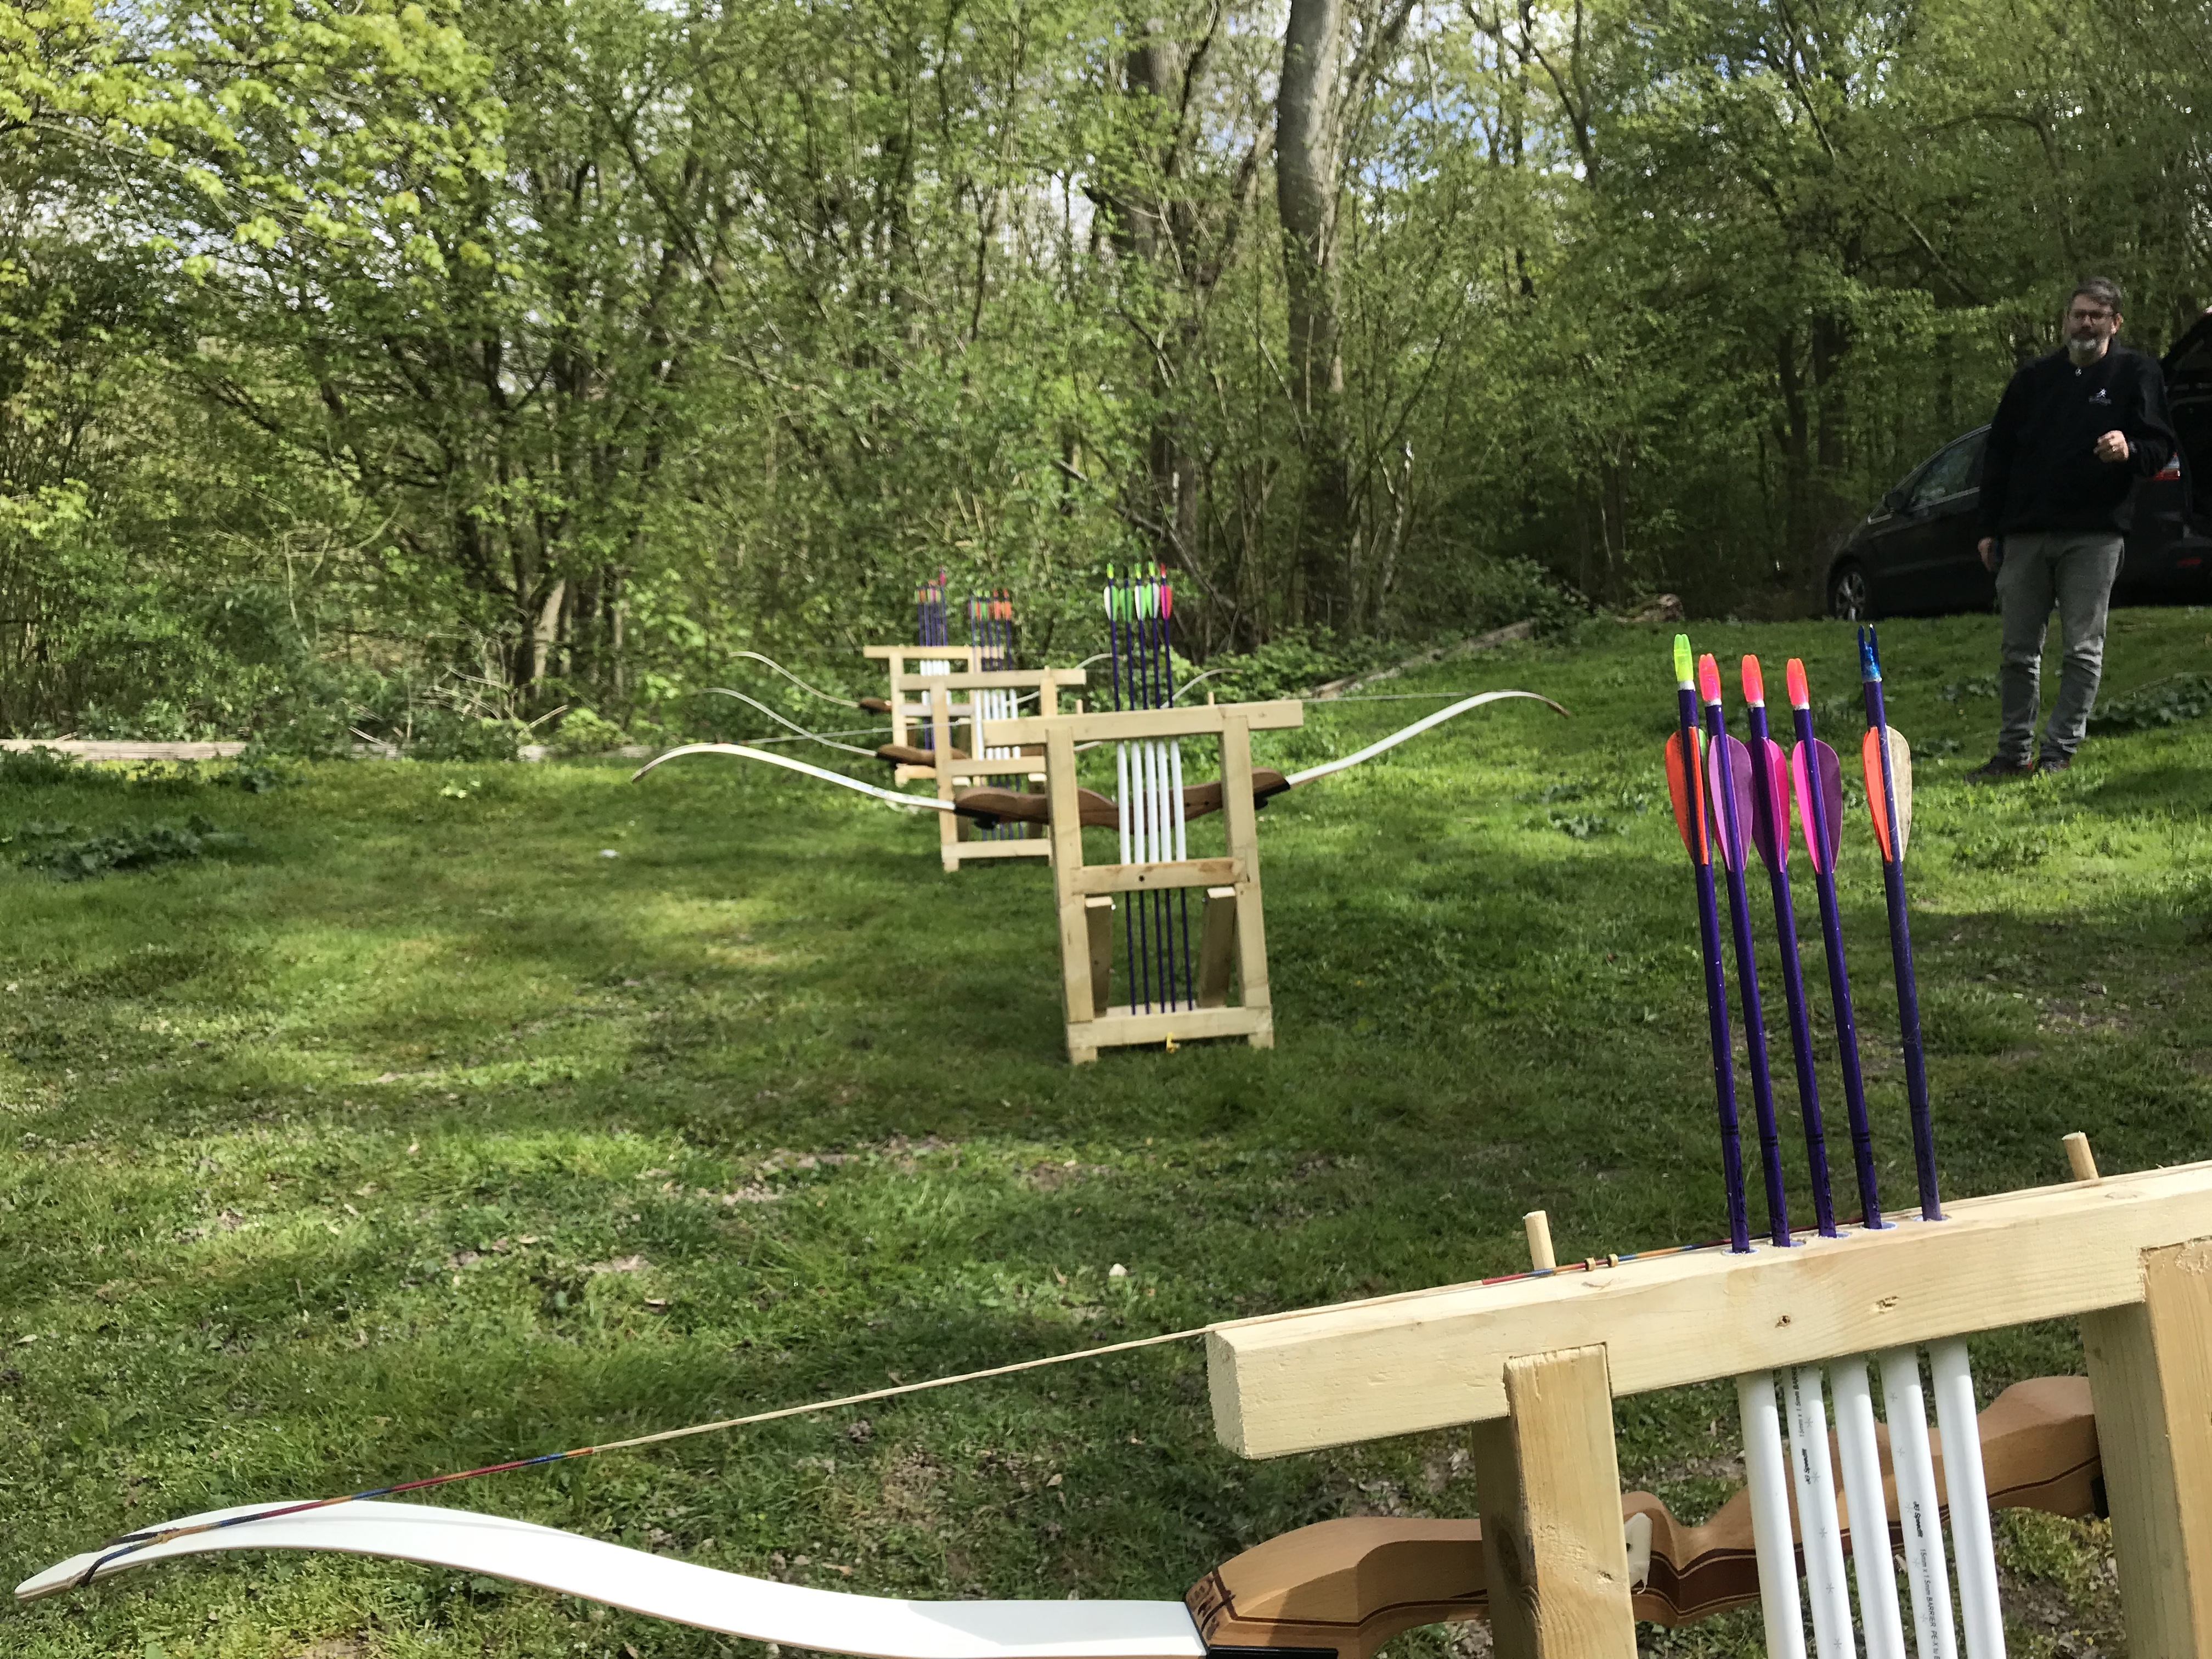 Archery range showing bows and arrows